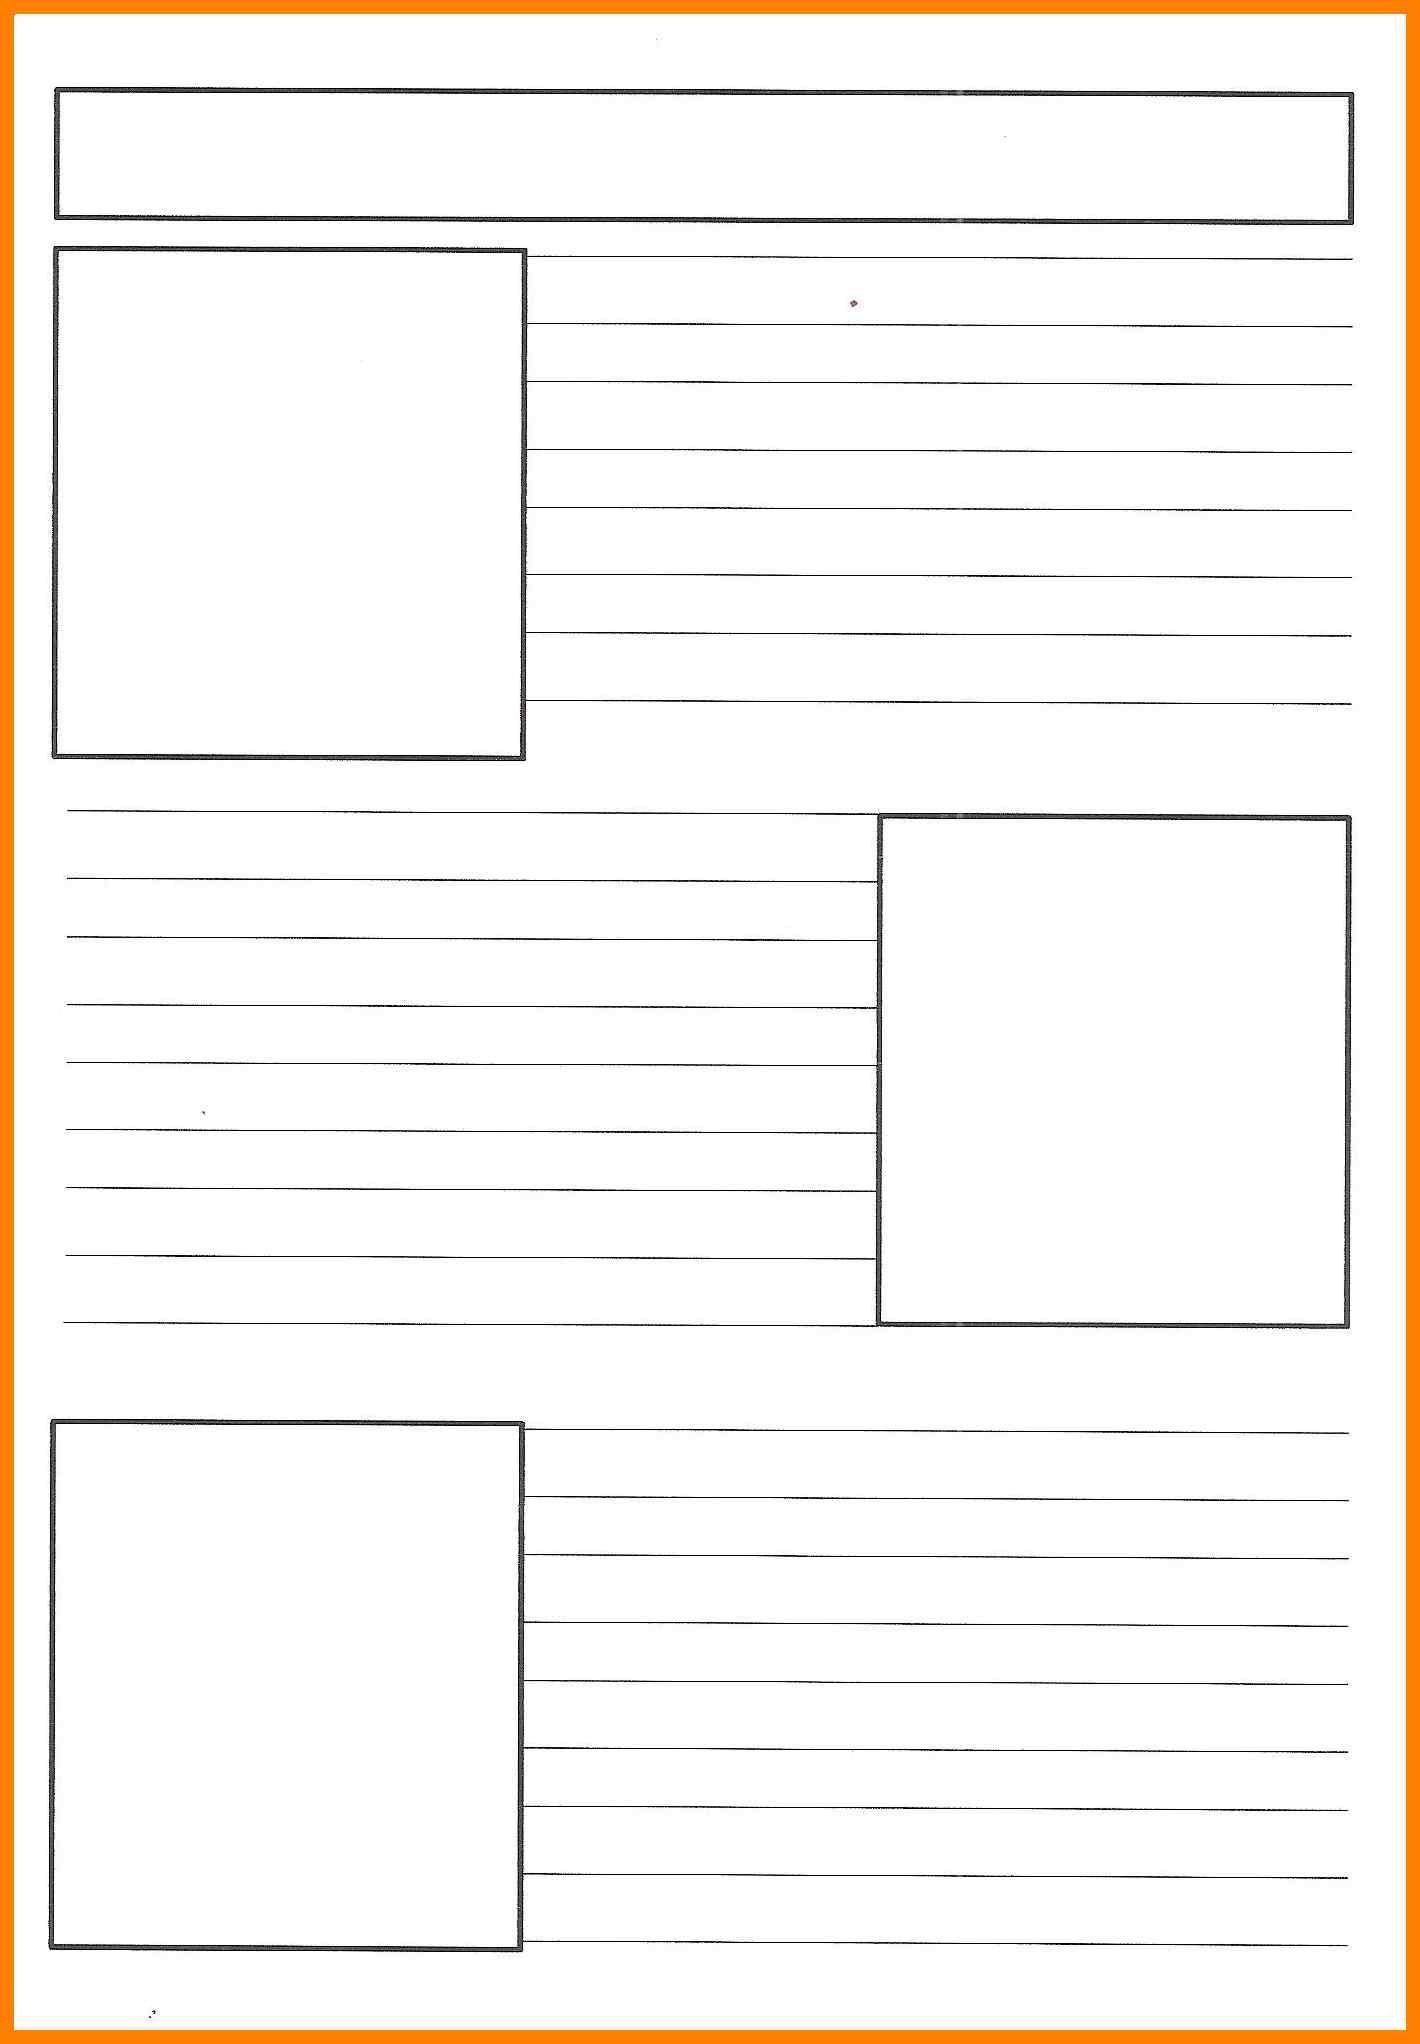 Free Printable Newspaper Template | Reference | Newspaper Article - Free Printable Newspaper Templates For Students